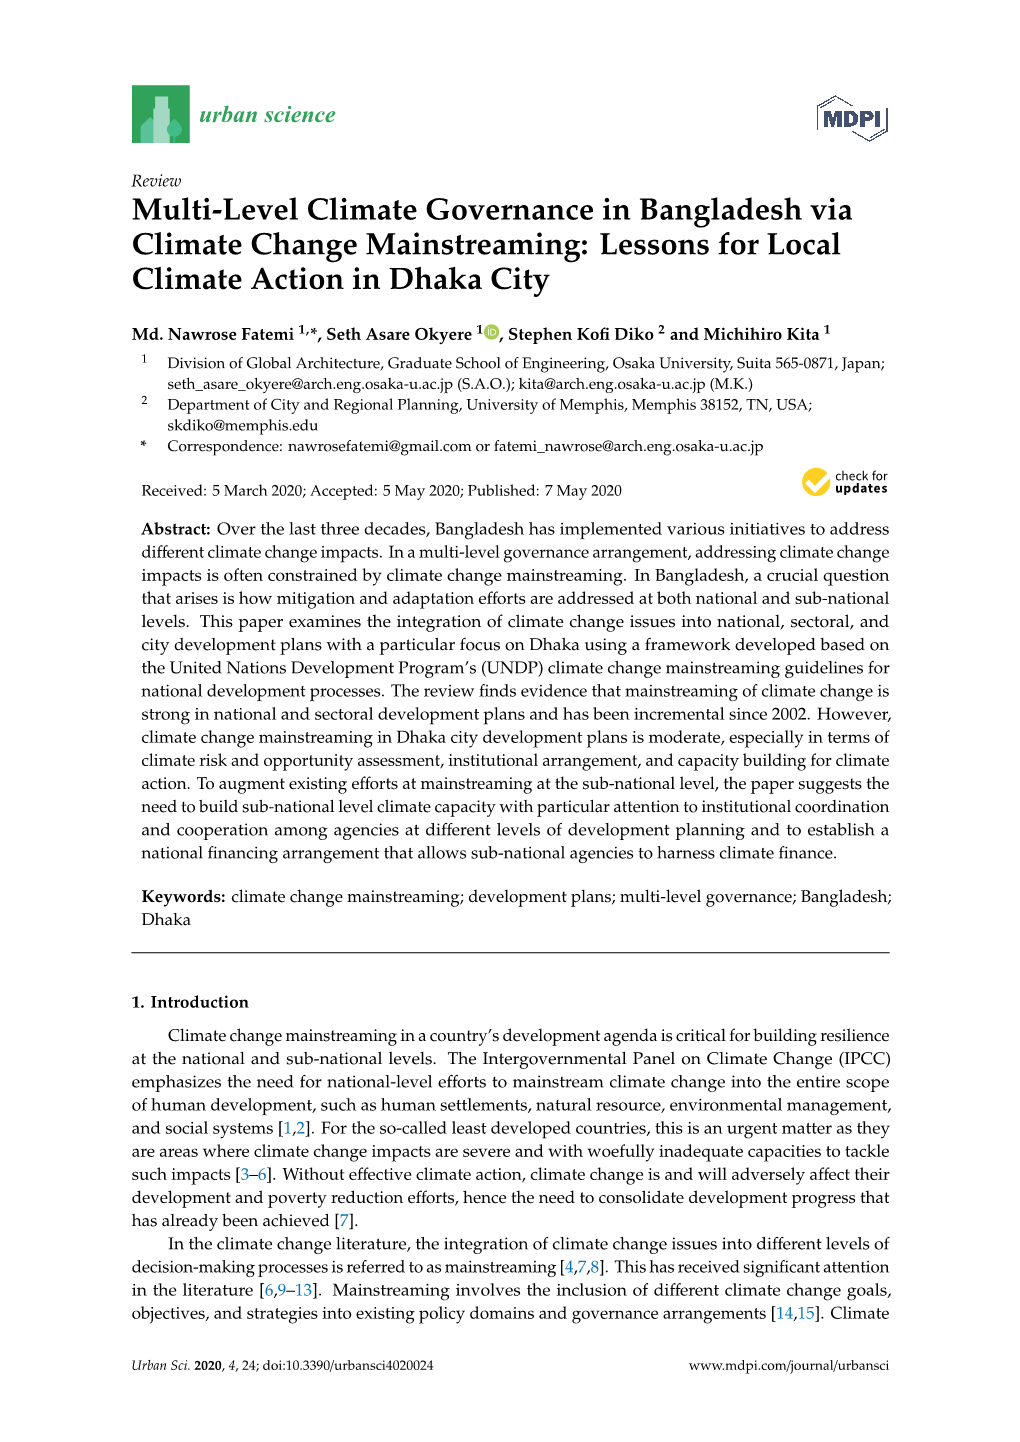 Lessons for Local Climate Action in Dhaka City